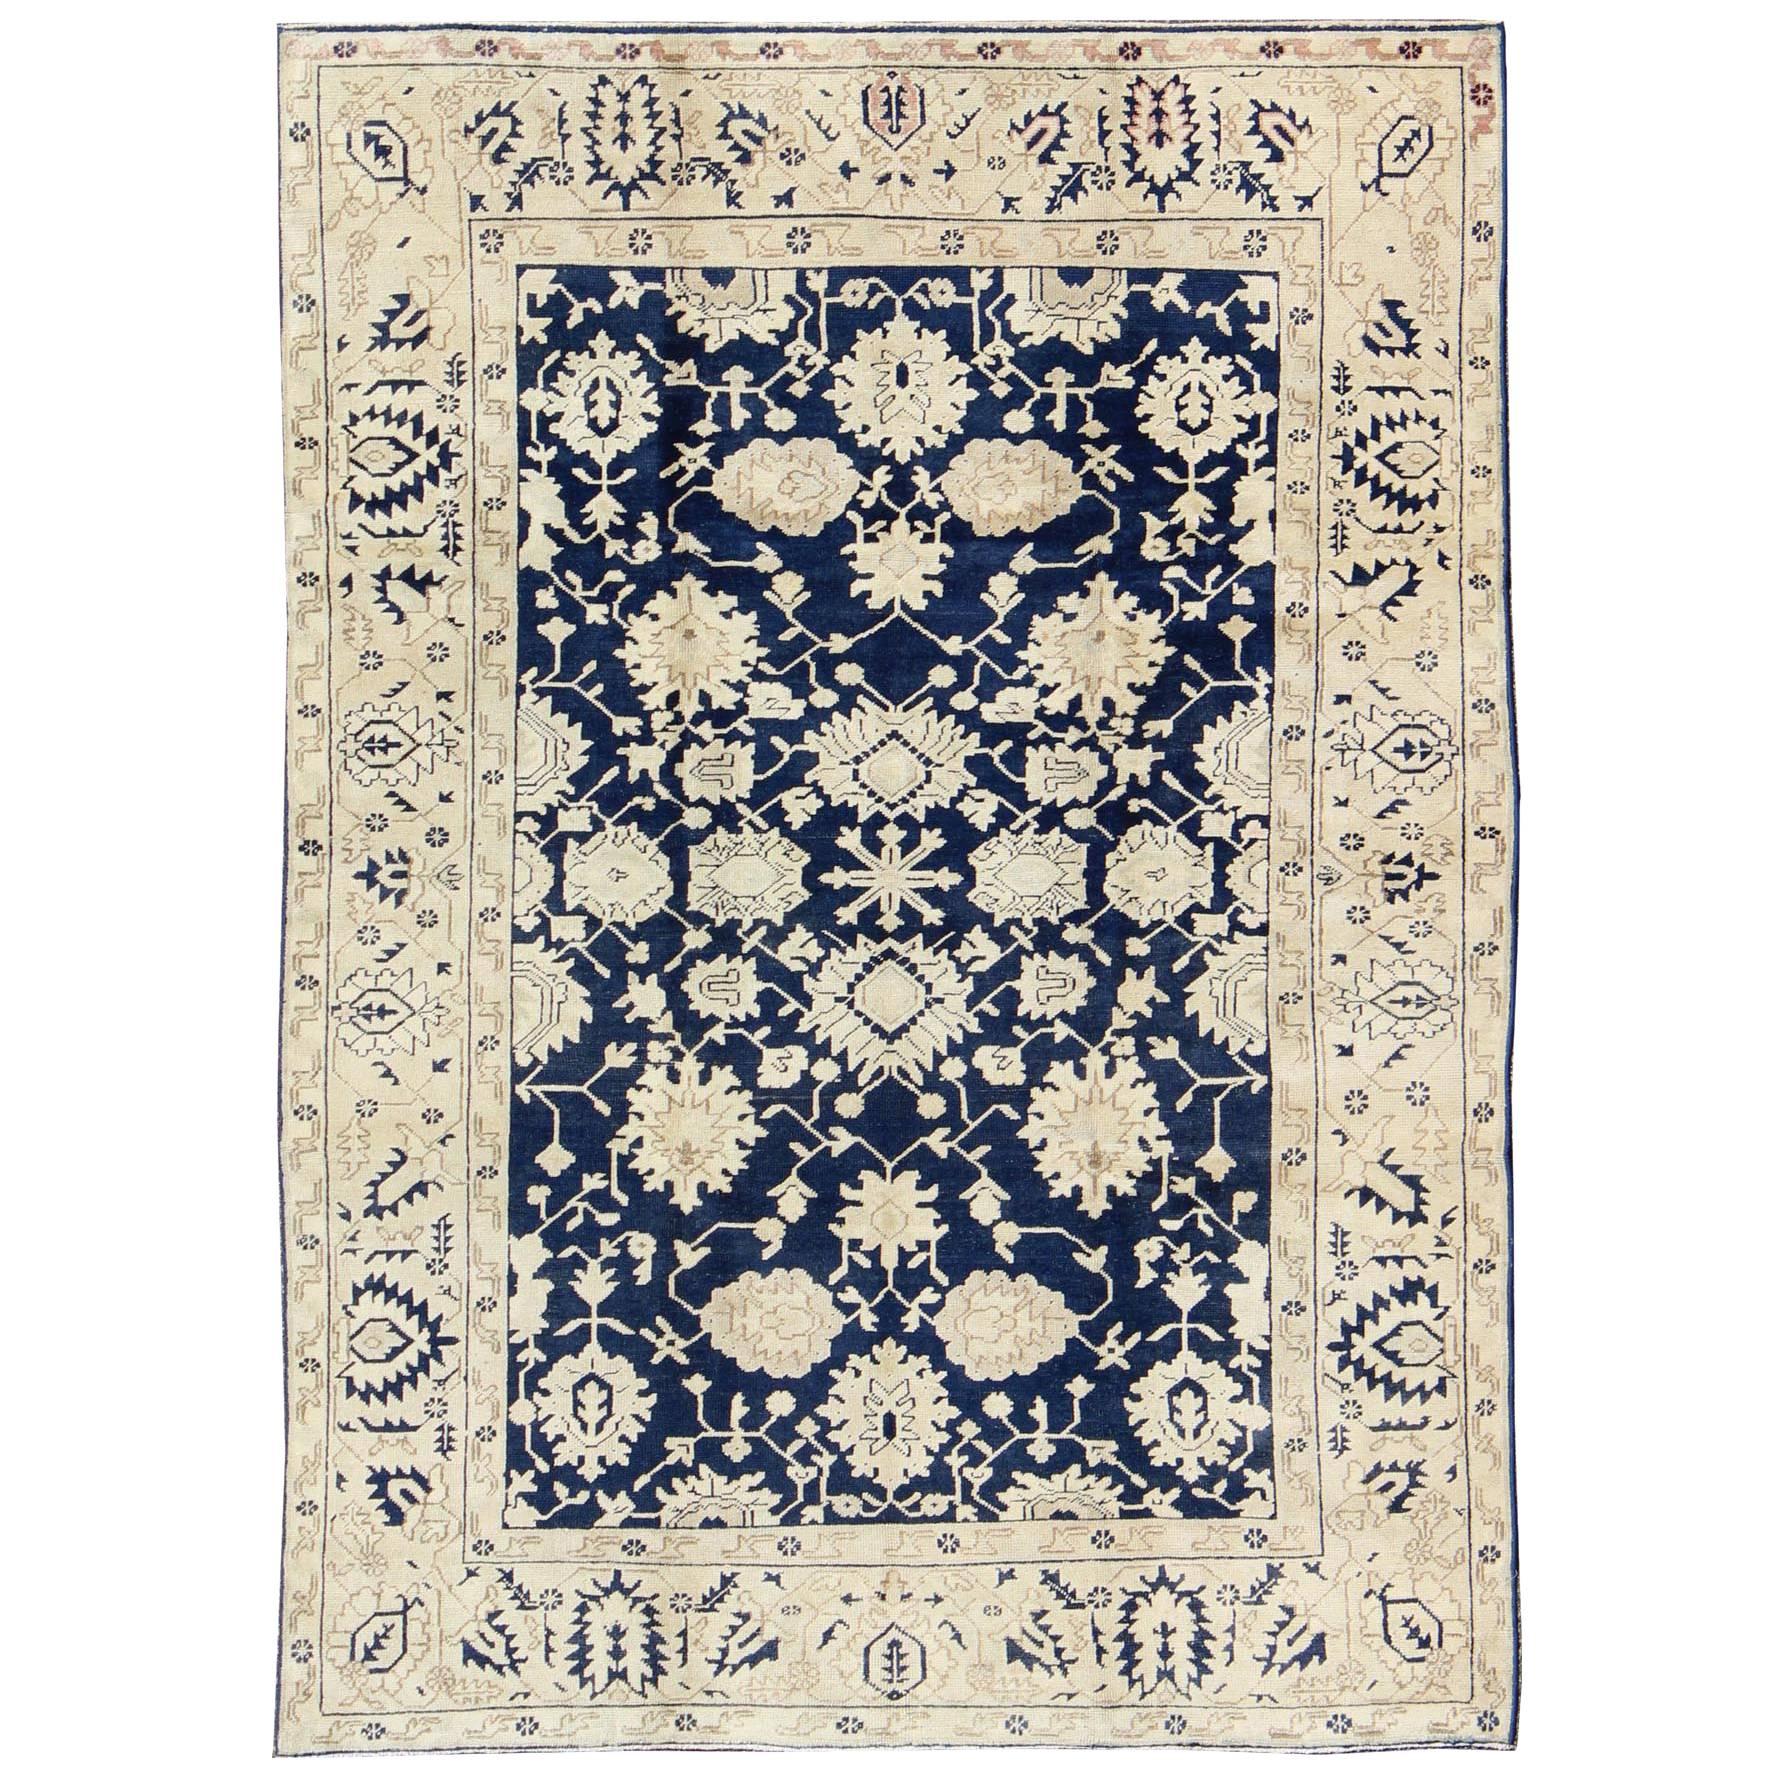 Unique Turkish Oushak Rug with Floral Design in Dark Blue, Cream and Light Brown